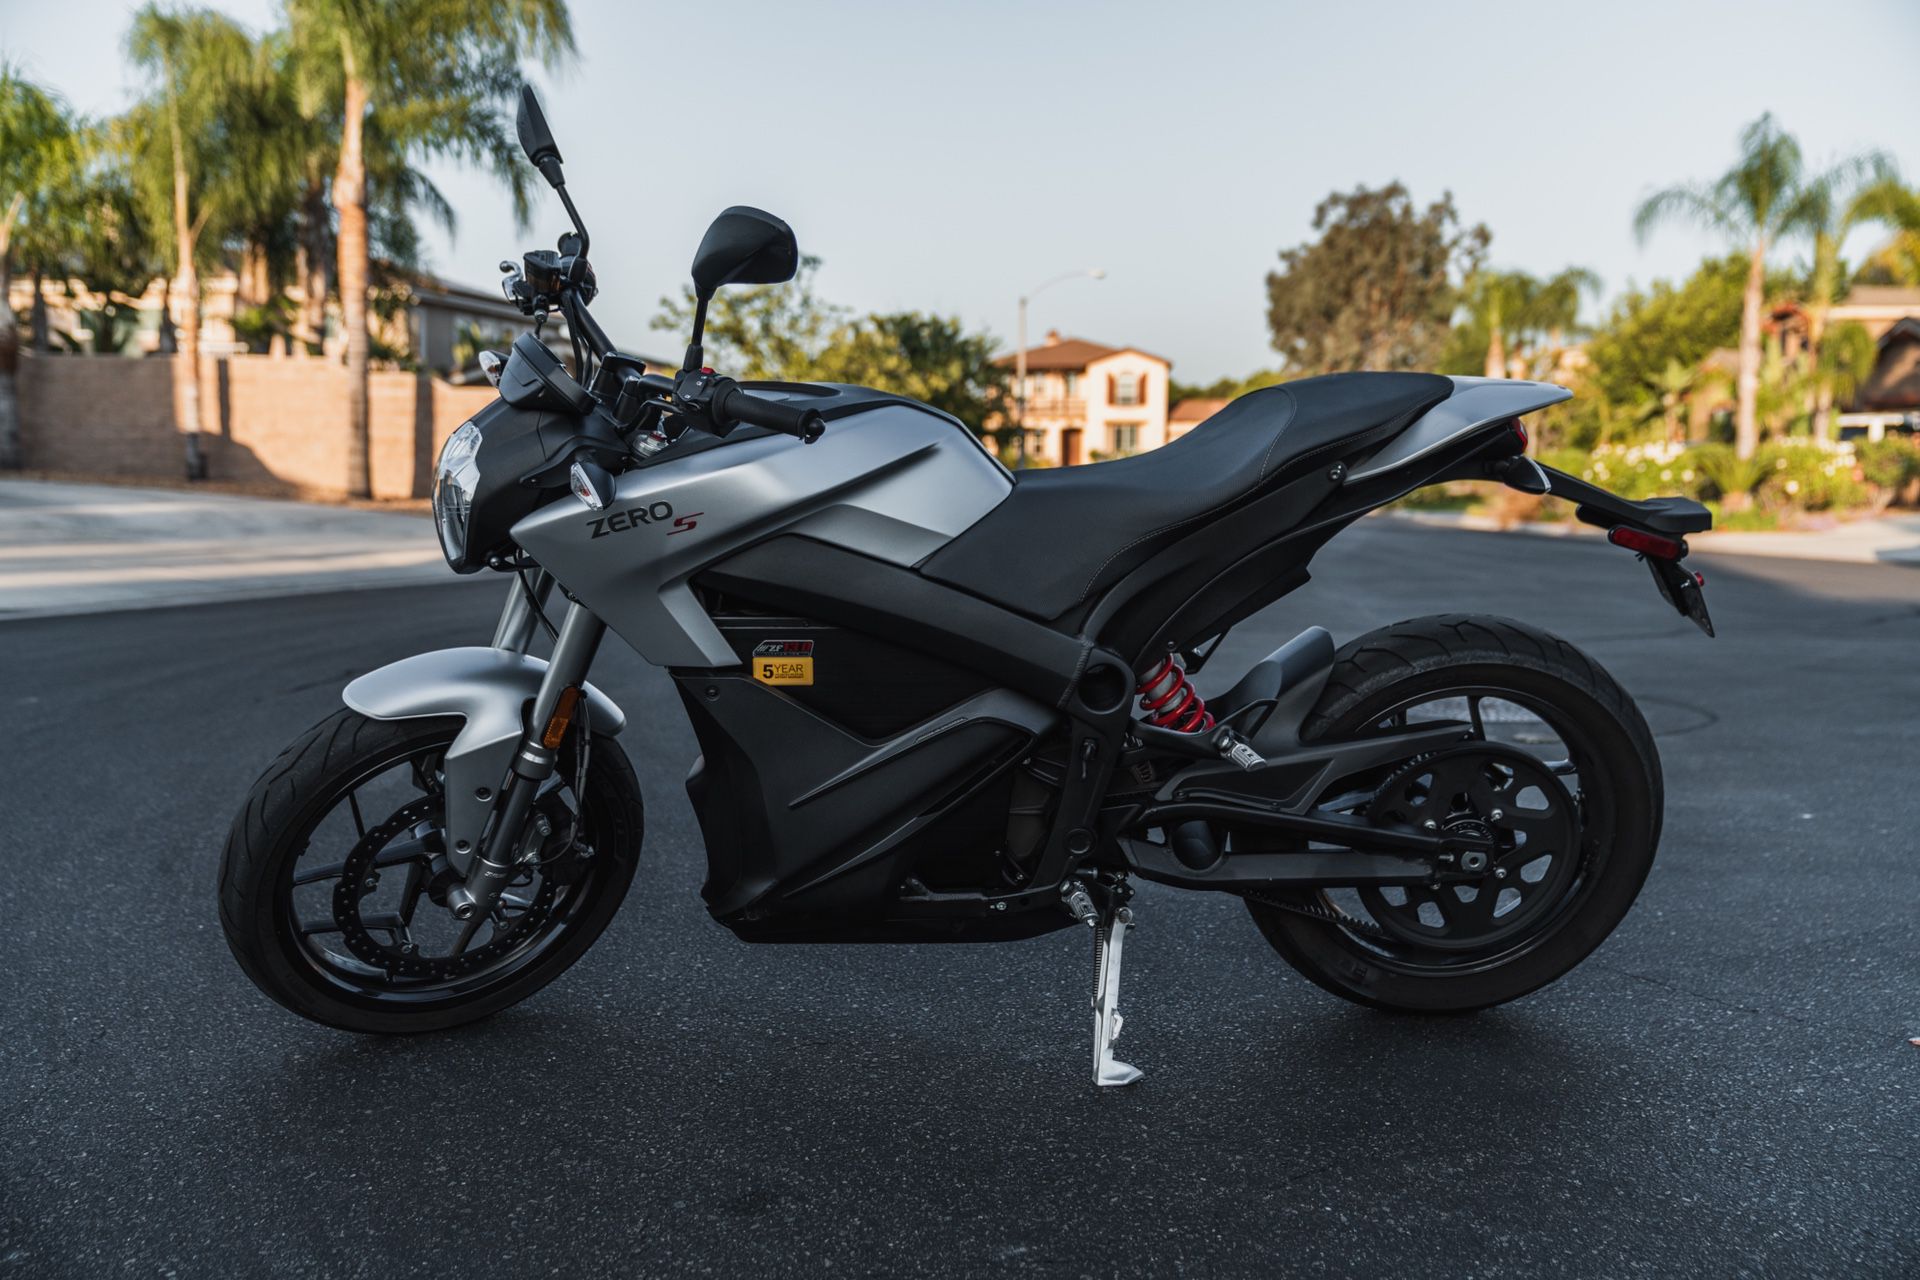 electric-motorcycle-2018-zero-s-zf13-0-power-tank-for-sale-in